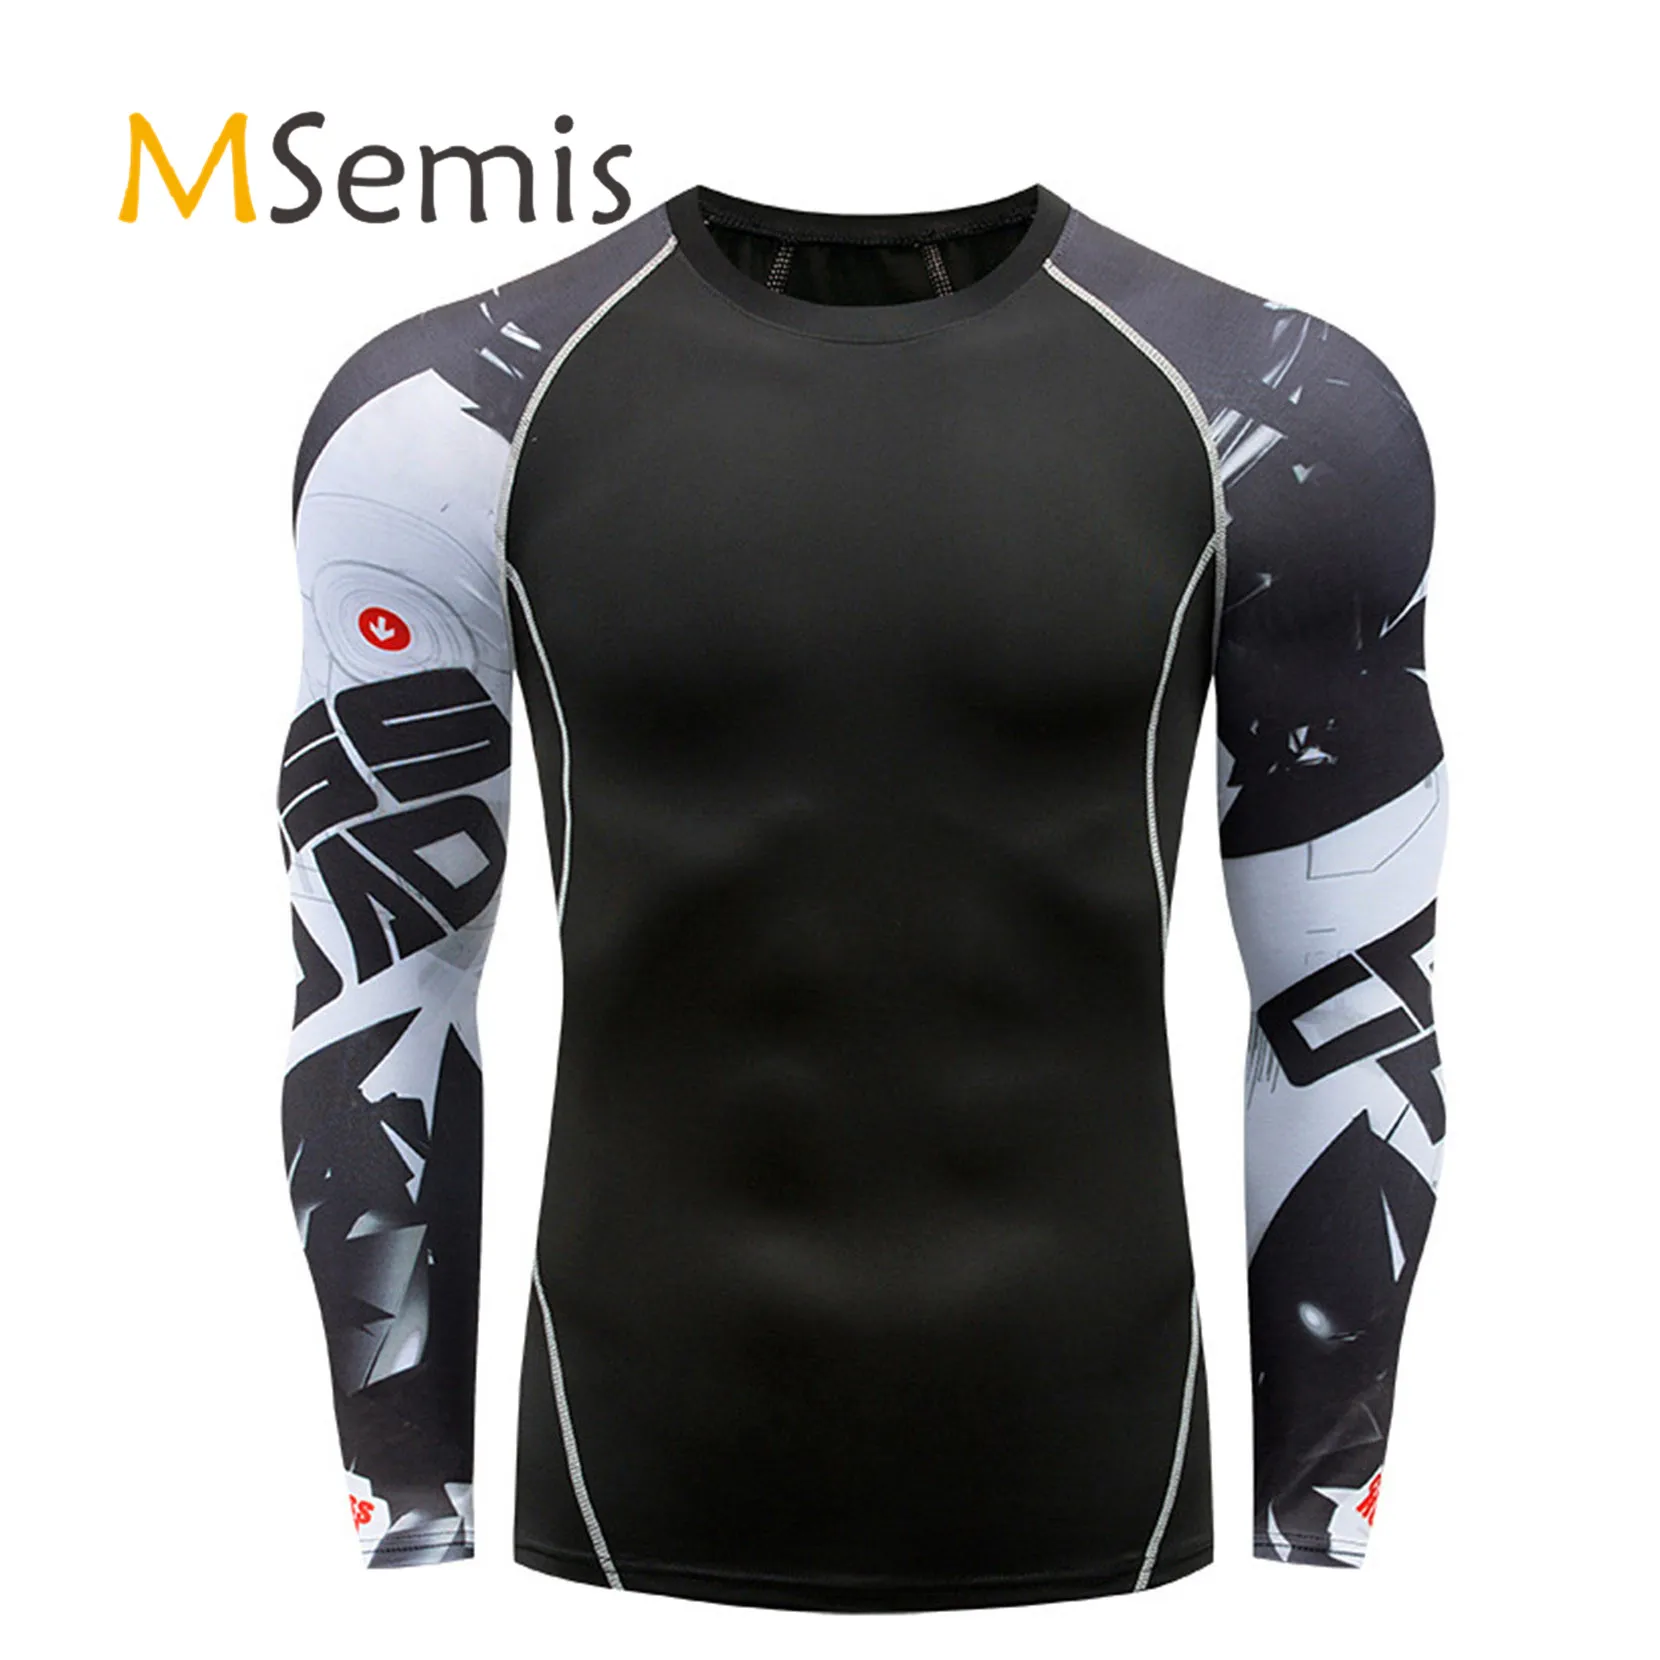 

Mens Gym Sports T-Shirts Quick Dry Moisture Wicking Rash Guard Tops Long Sleeve with Print Compression T-shirt for Sports Swim